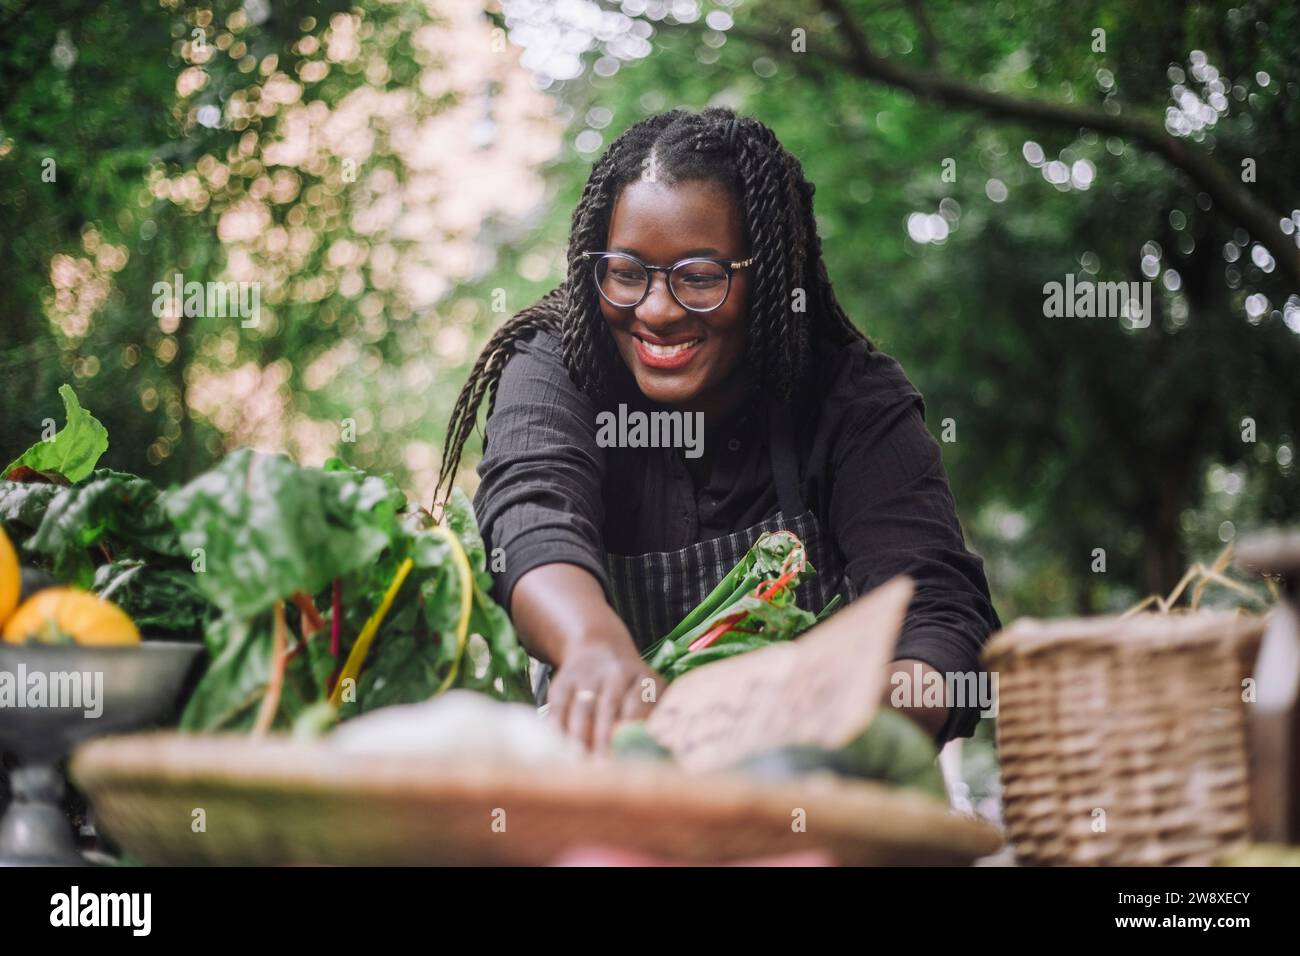 Smiling female vendor with braided hair arranging vegetables at market Stock Photo